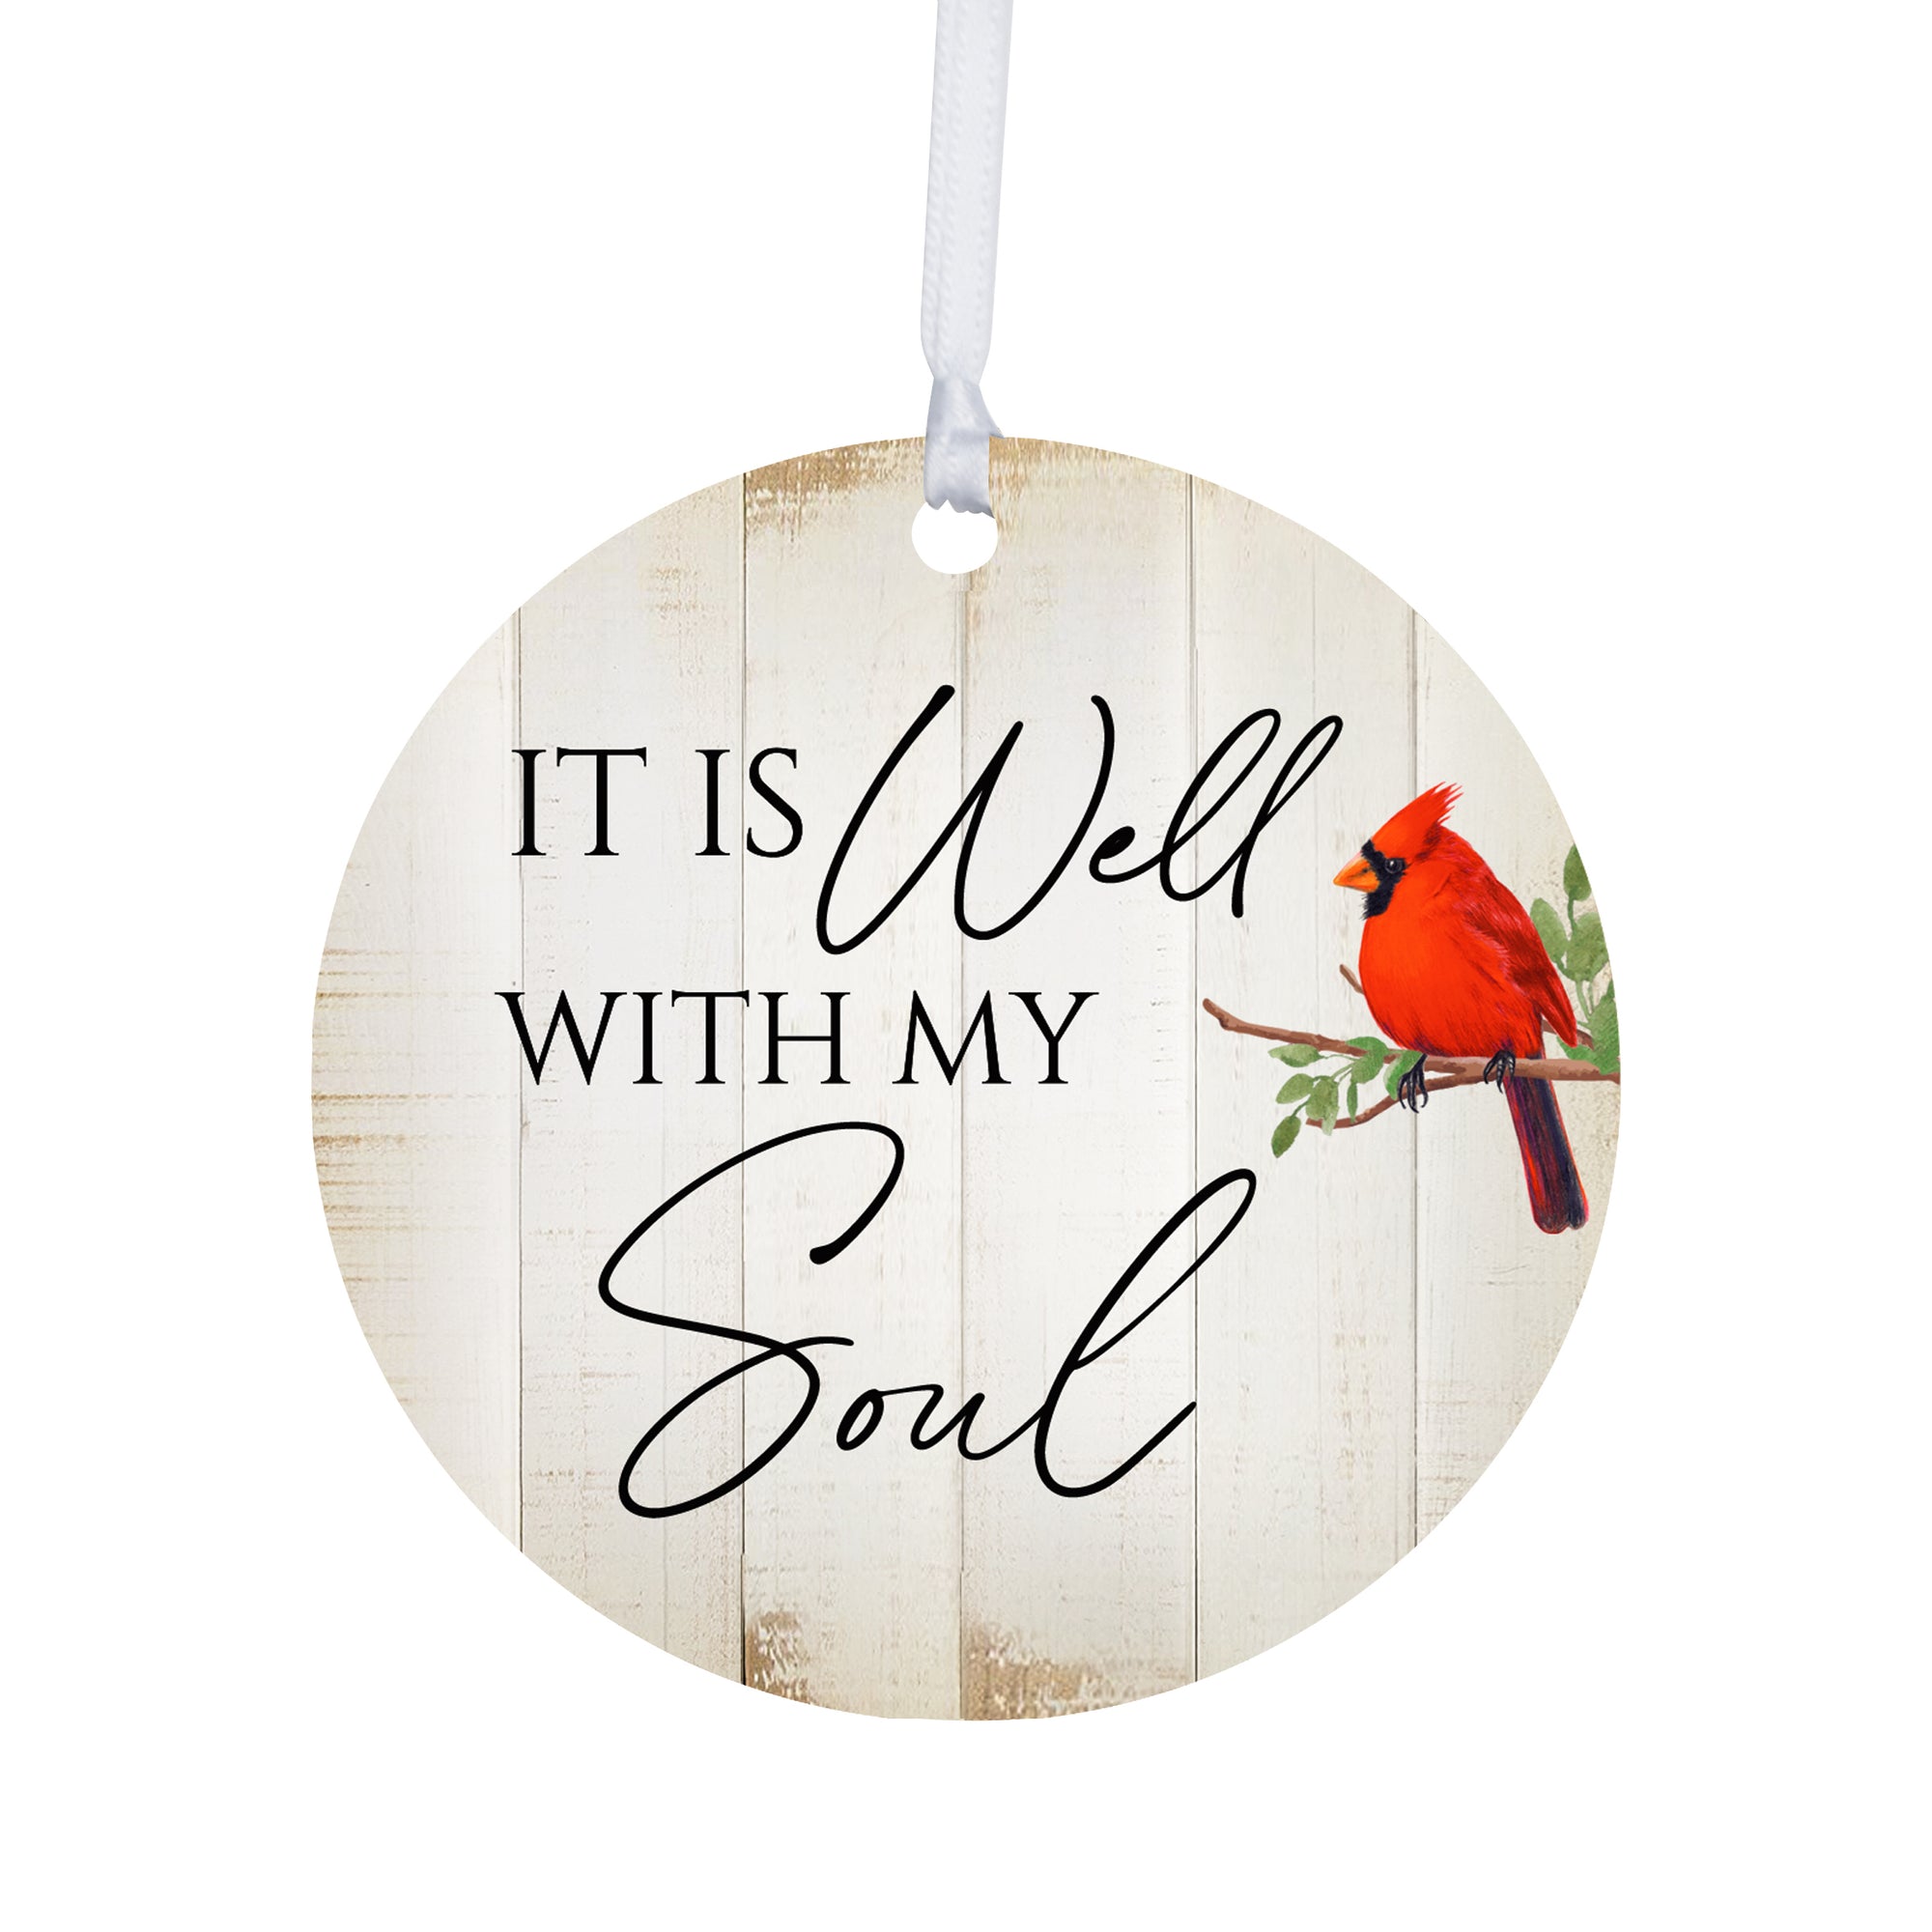 Vintage-Inspired Cardinal Ornament With Everyday Verses Gift Ideas - It Is Well